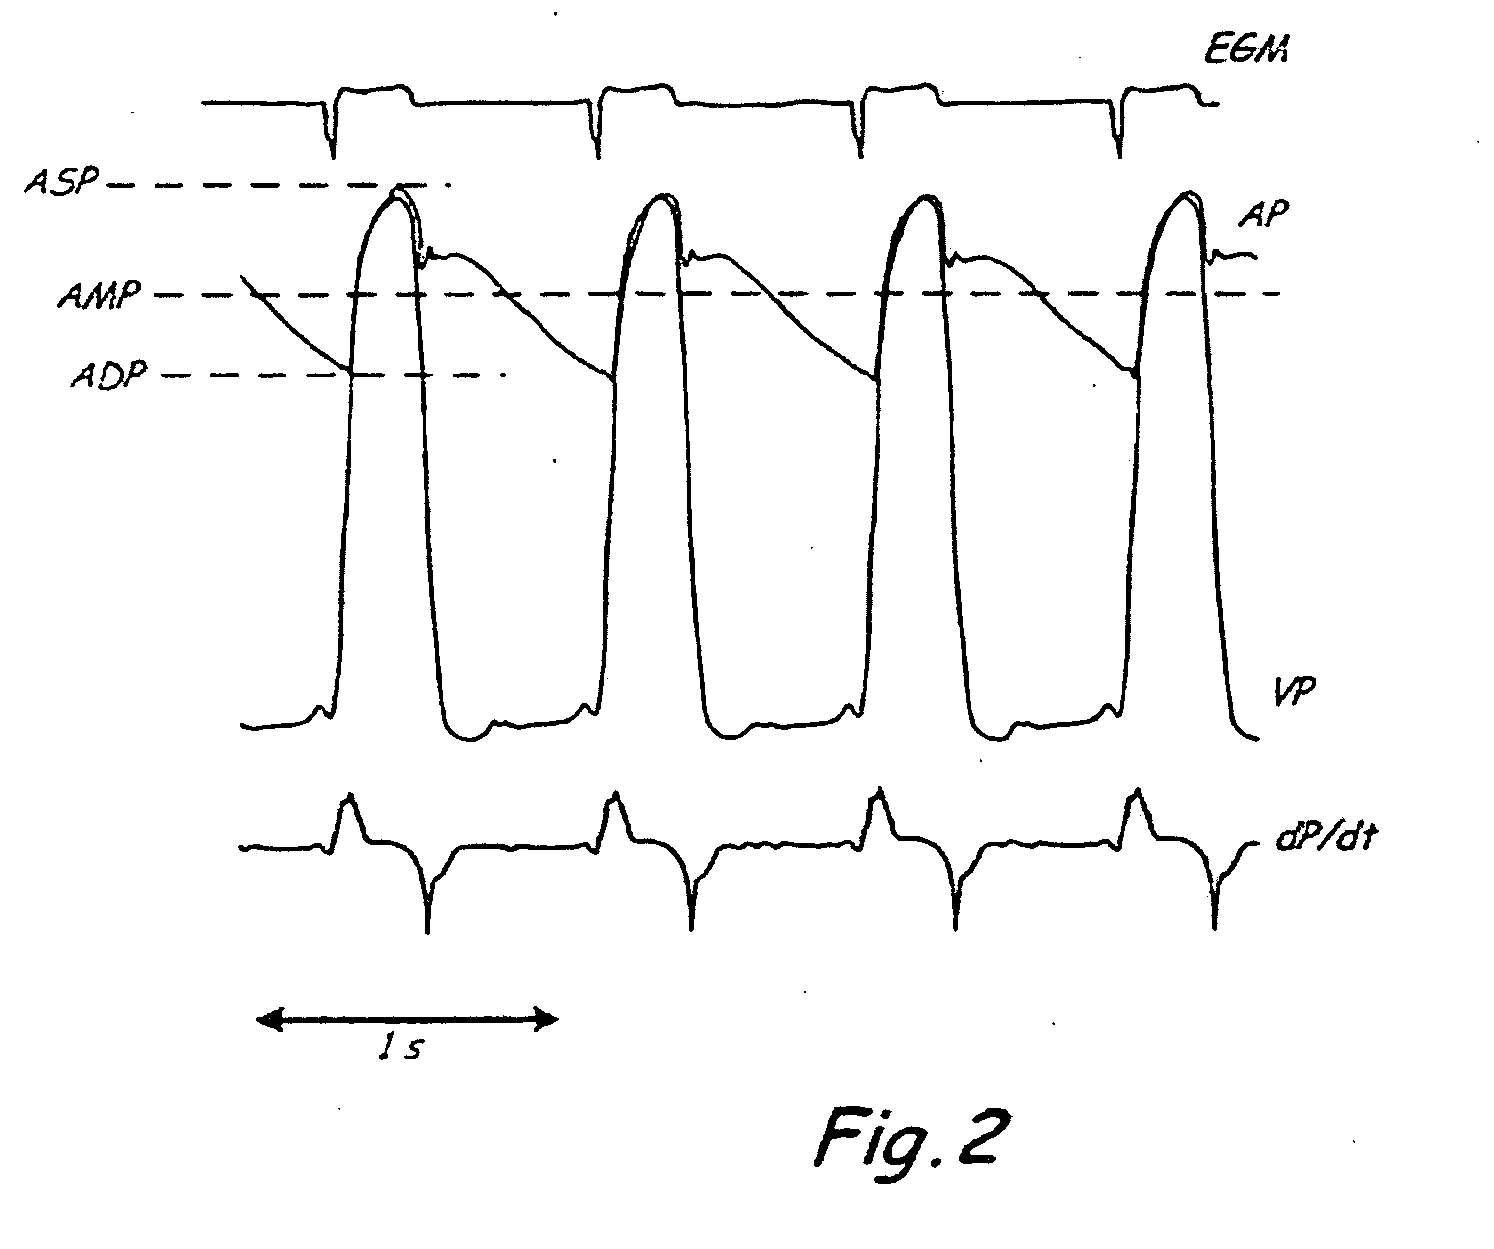 System and method of determining arterial blood pressure and ventricular fill parameters from ventricular blood pressure waveform data